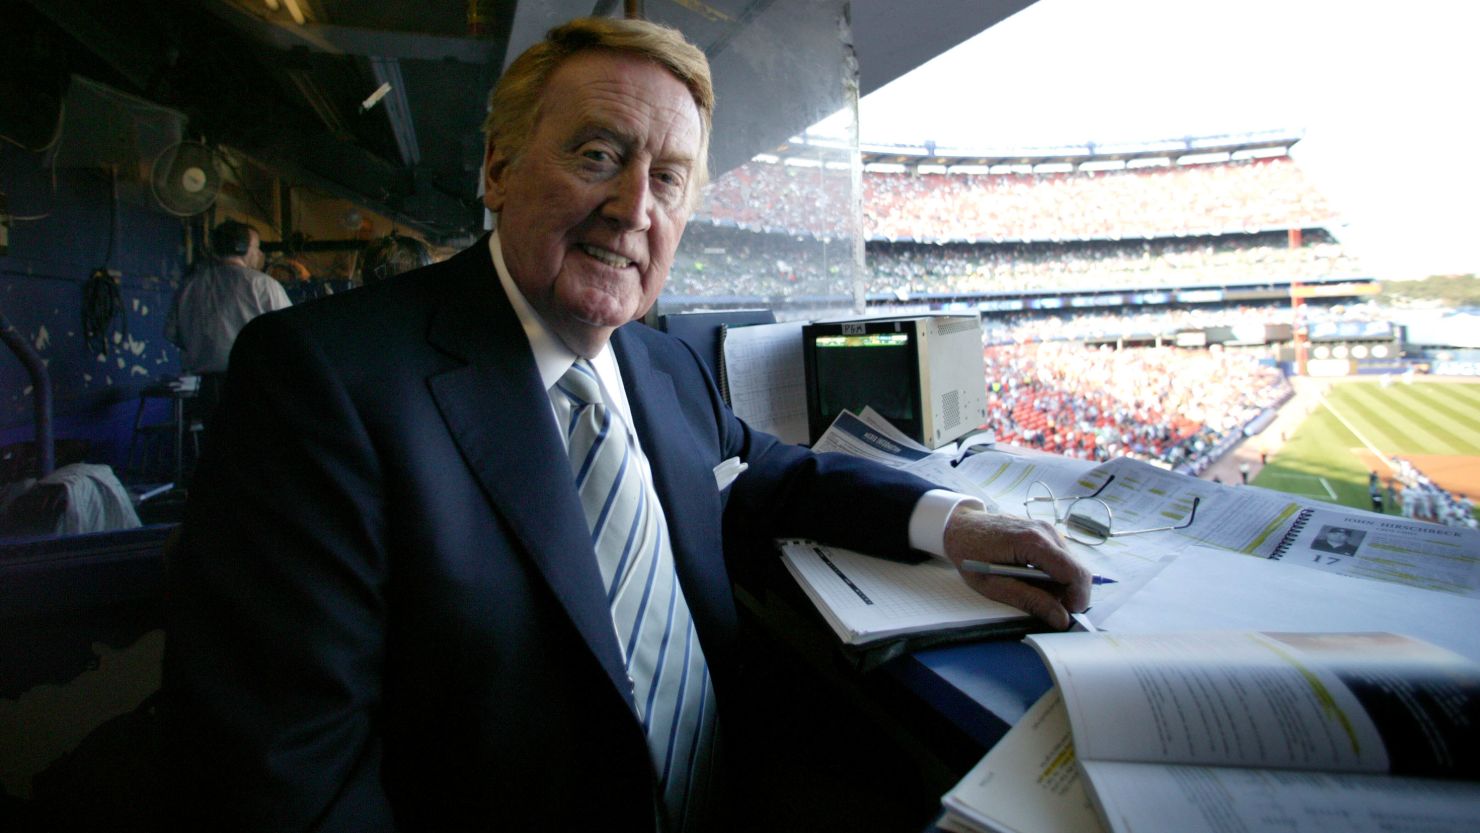 Announcer Vin Scully at Shea Stadium before the start of Game 1 of the NLDS, October, 2006.